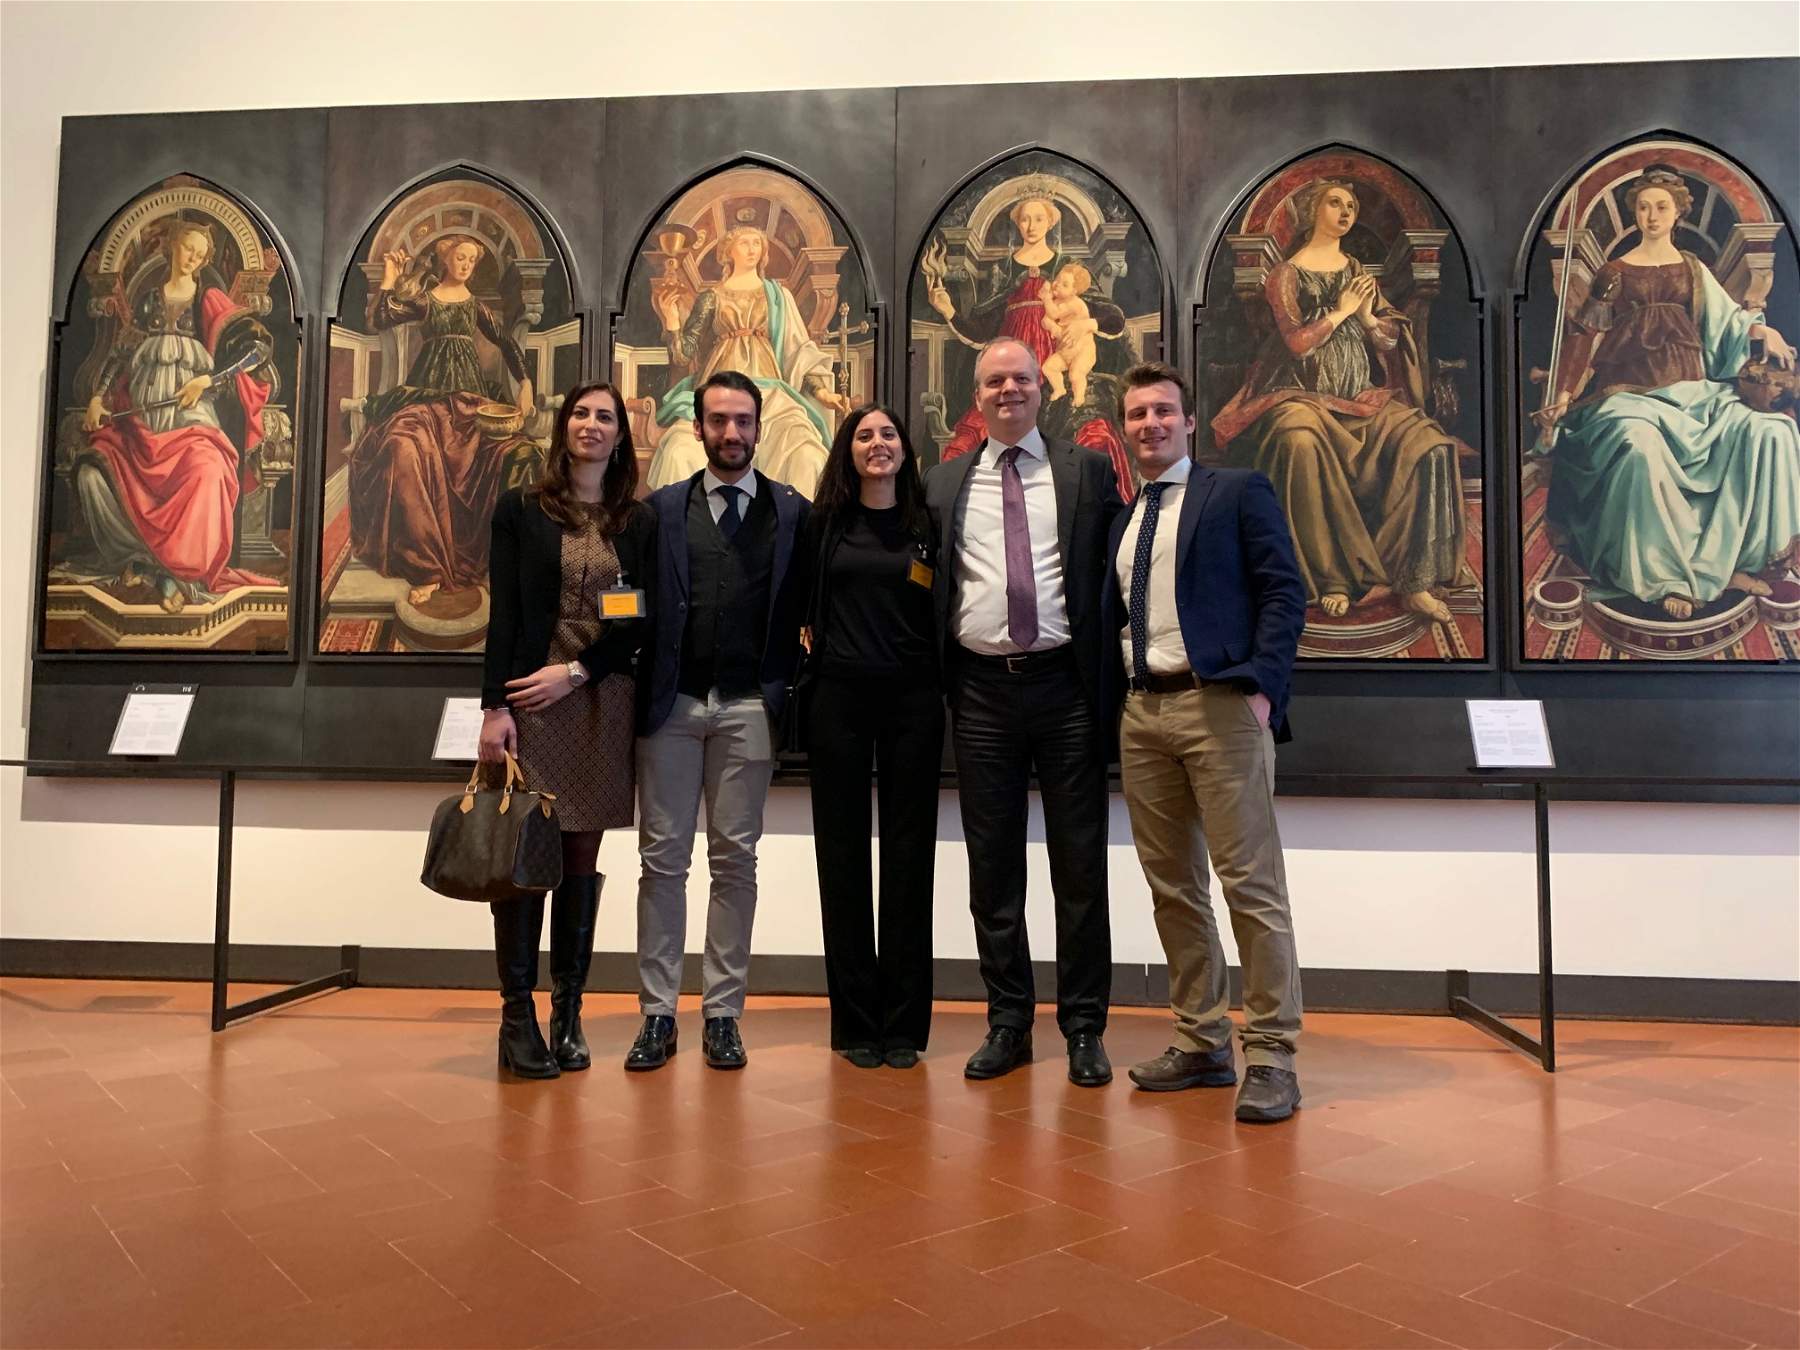 They saved the life of a pensioner who fell ill in front of Botticelli's Venus, awarded by the Uffizi